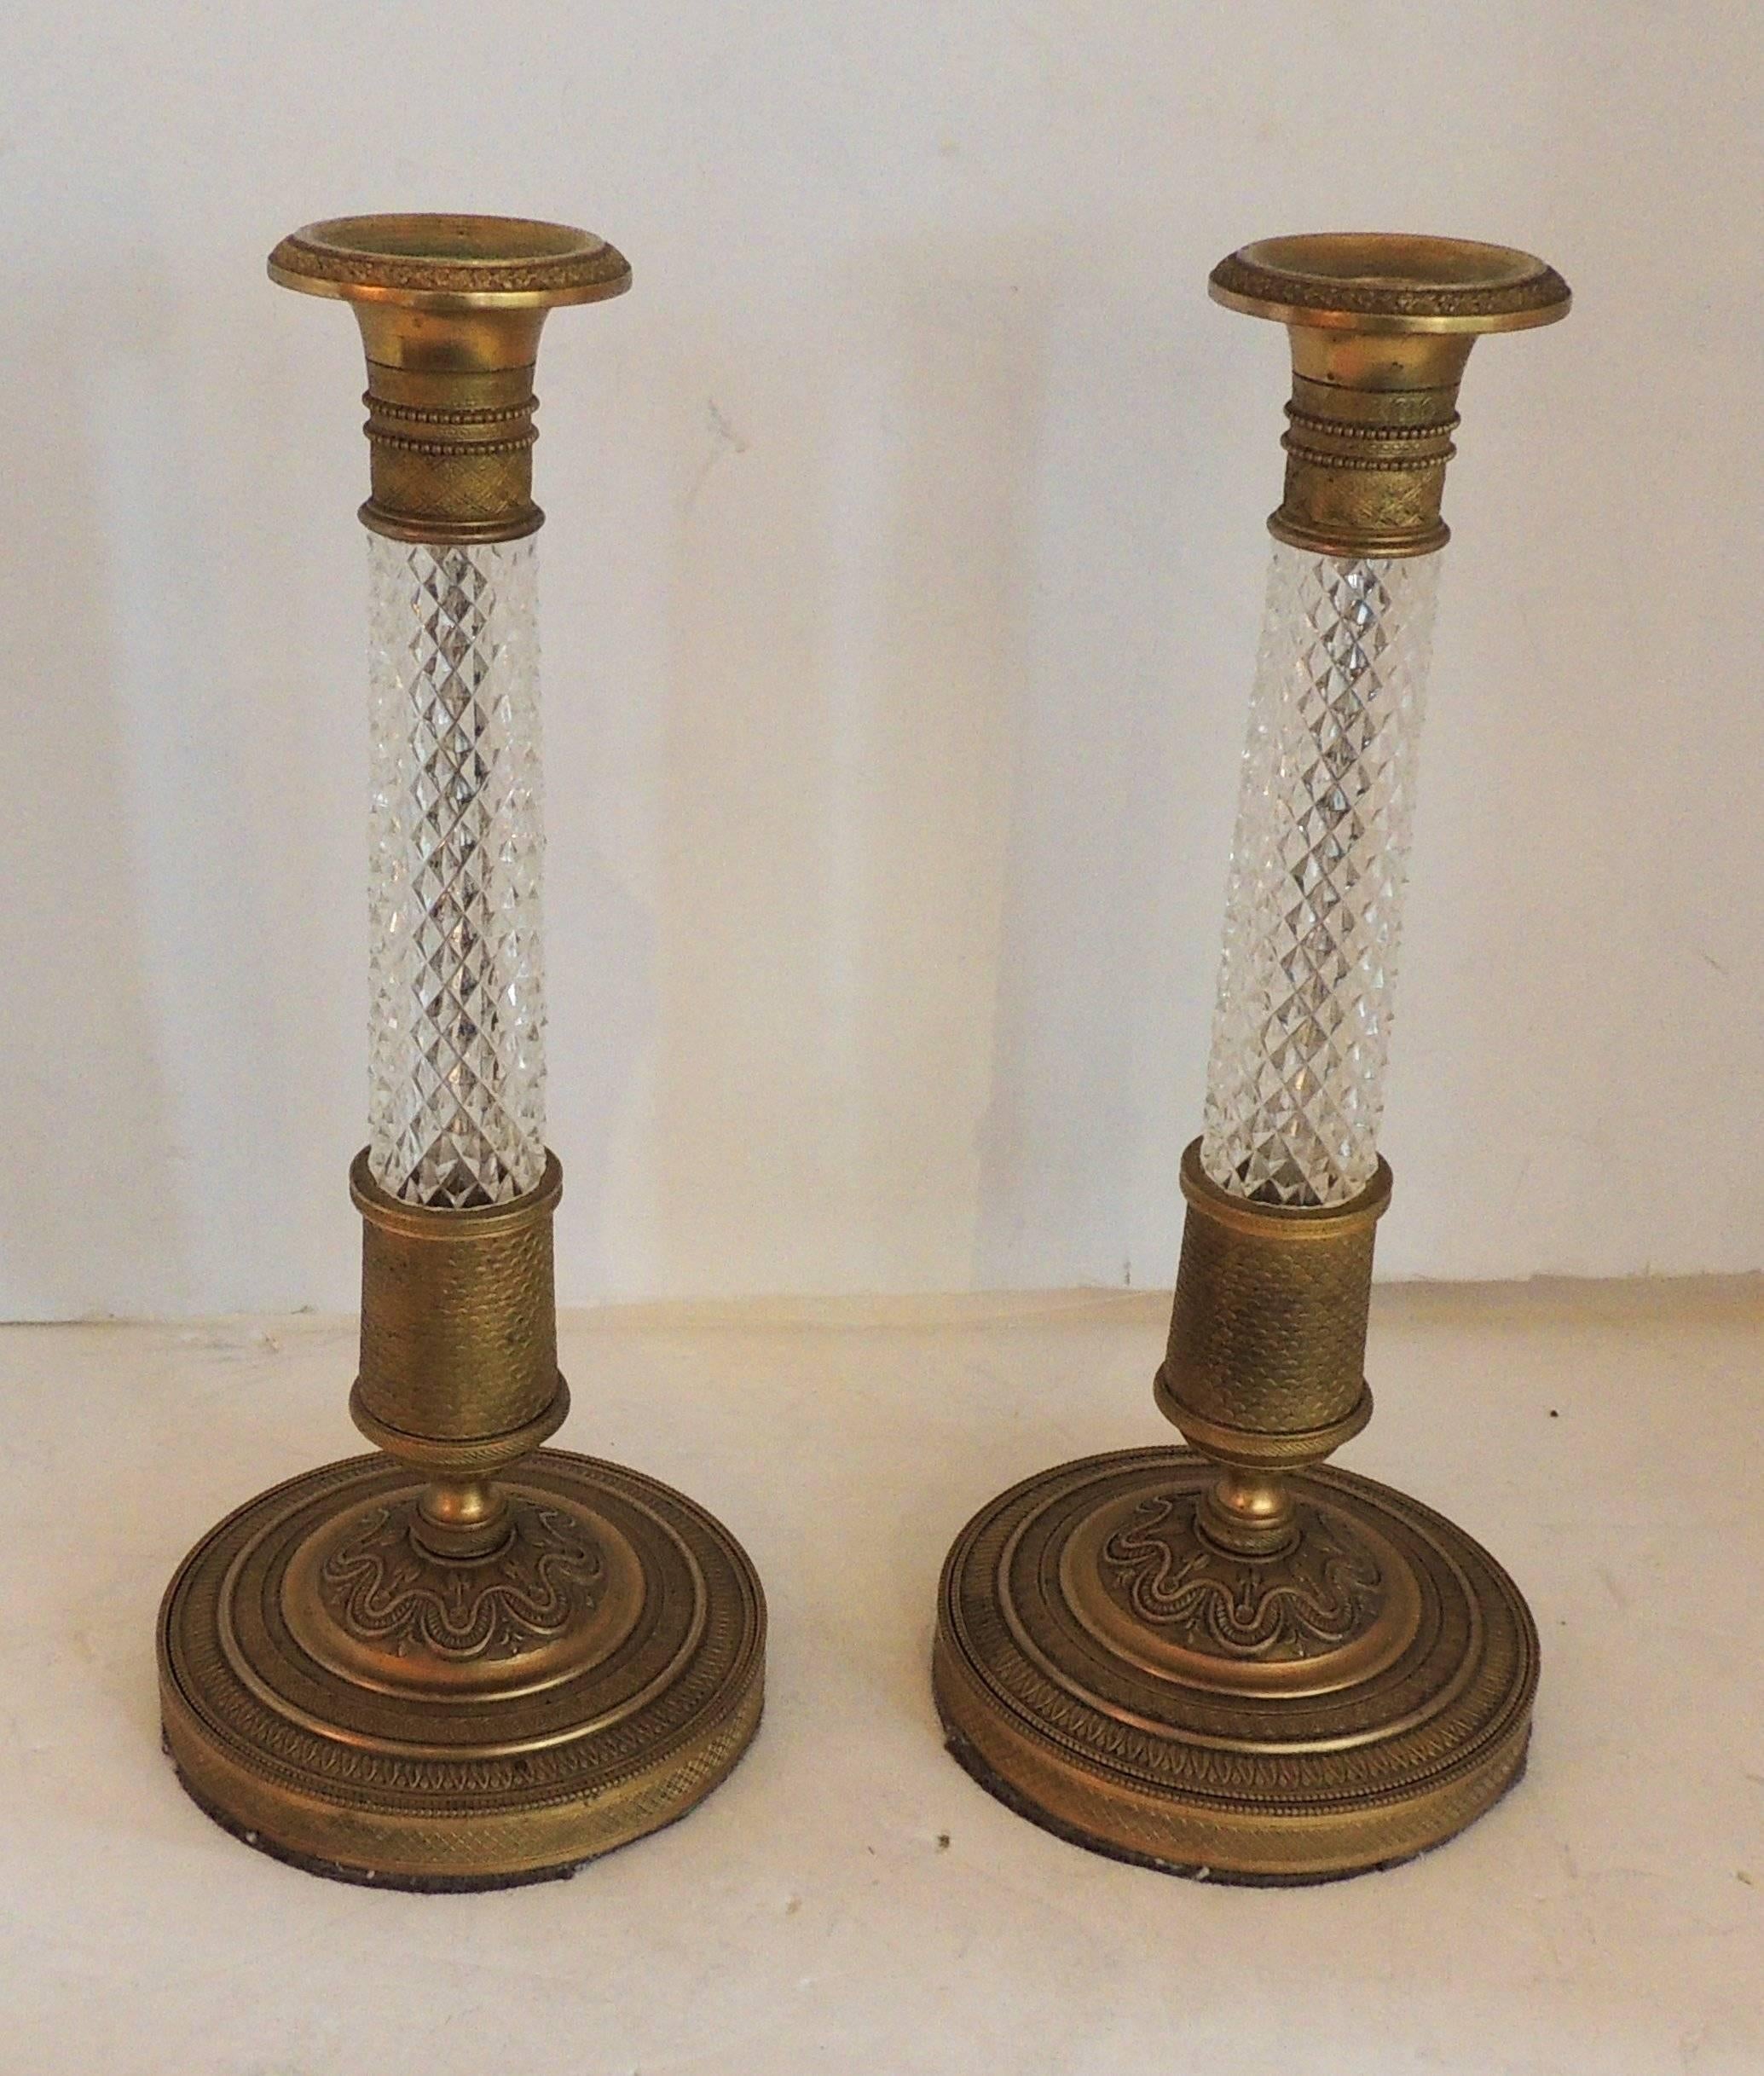 An elegant French Empire or neoclassical pair of doré bronze and cut crystal ormolu-mounted candlesticks.

Measures: 4.75W x 11 H.